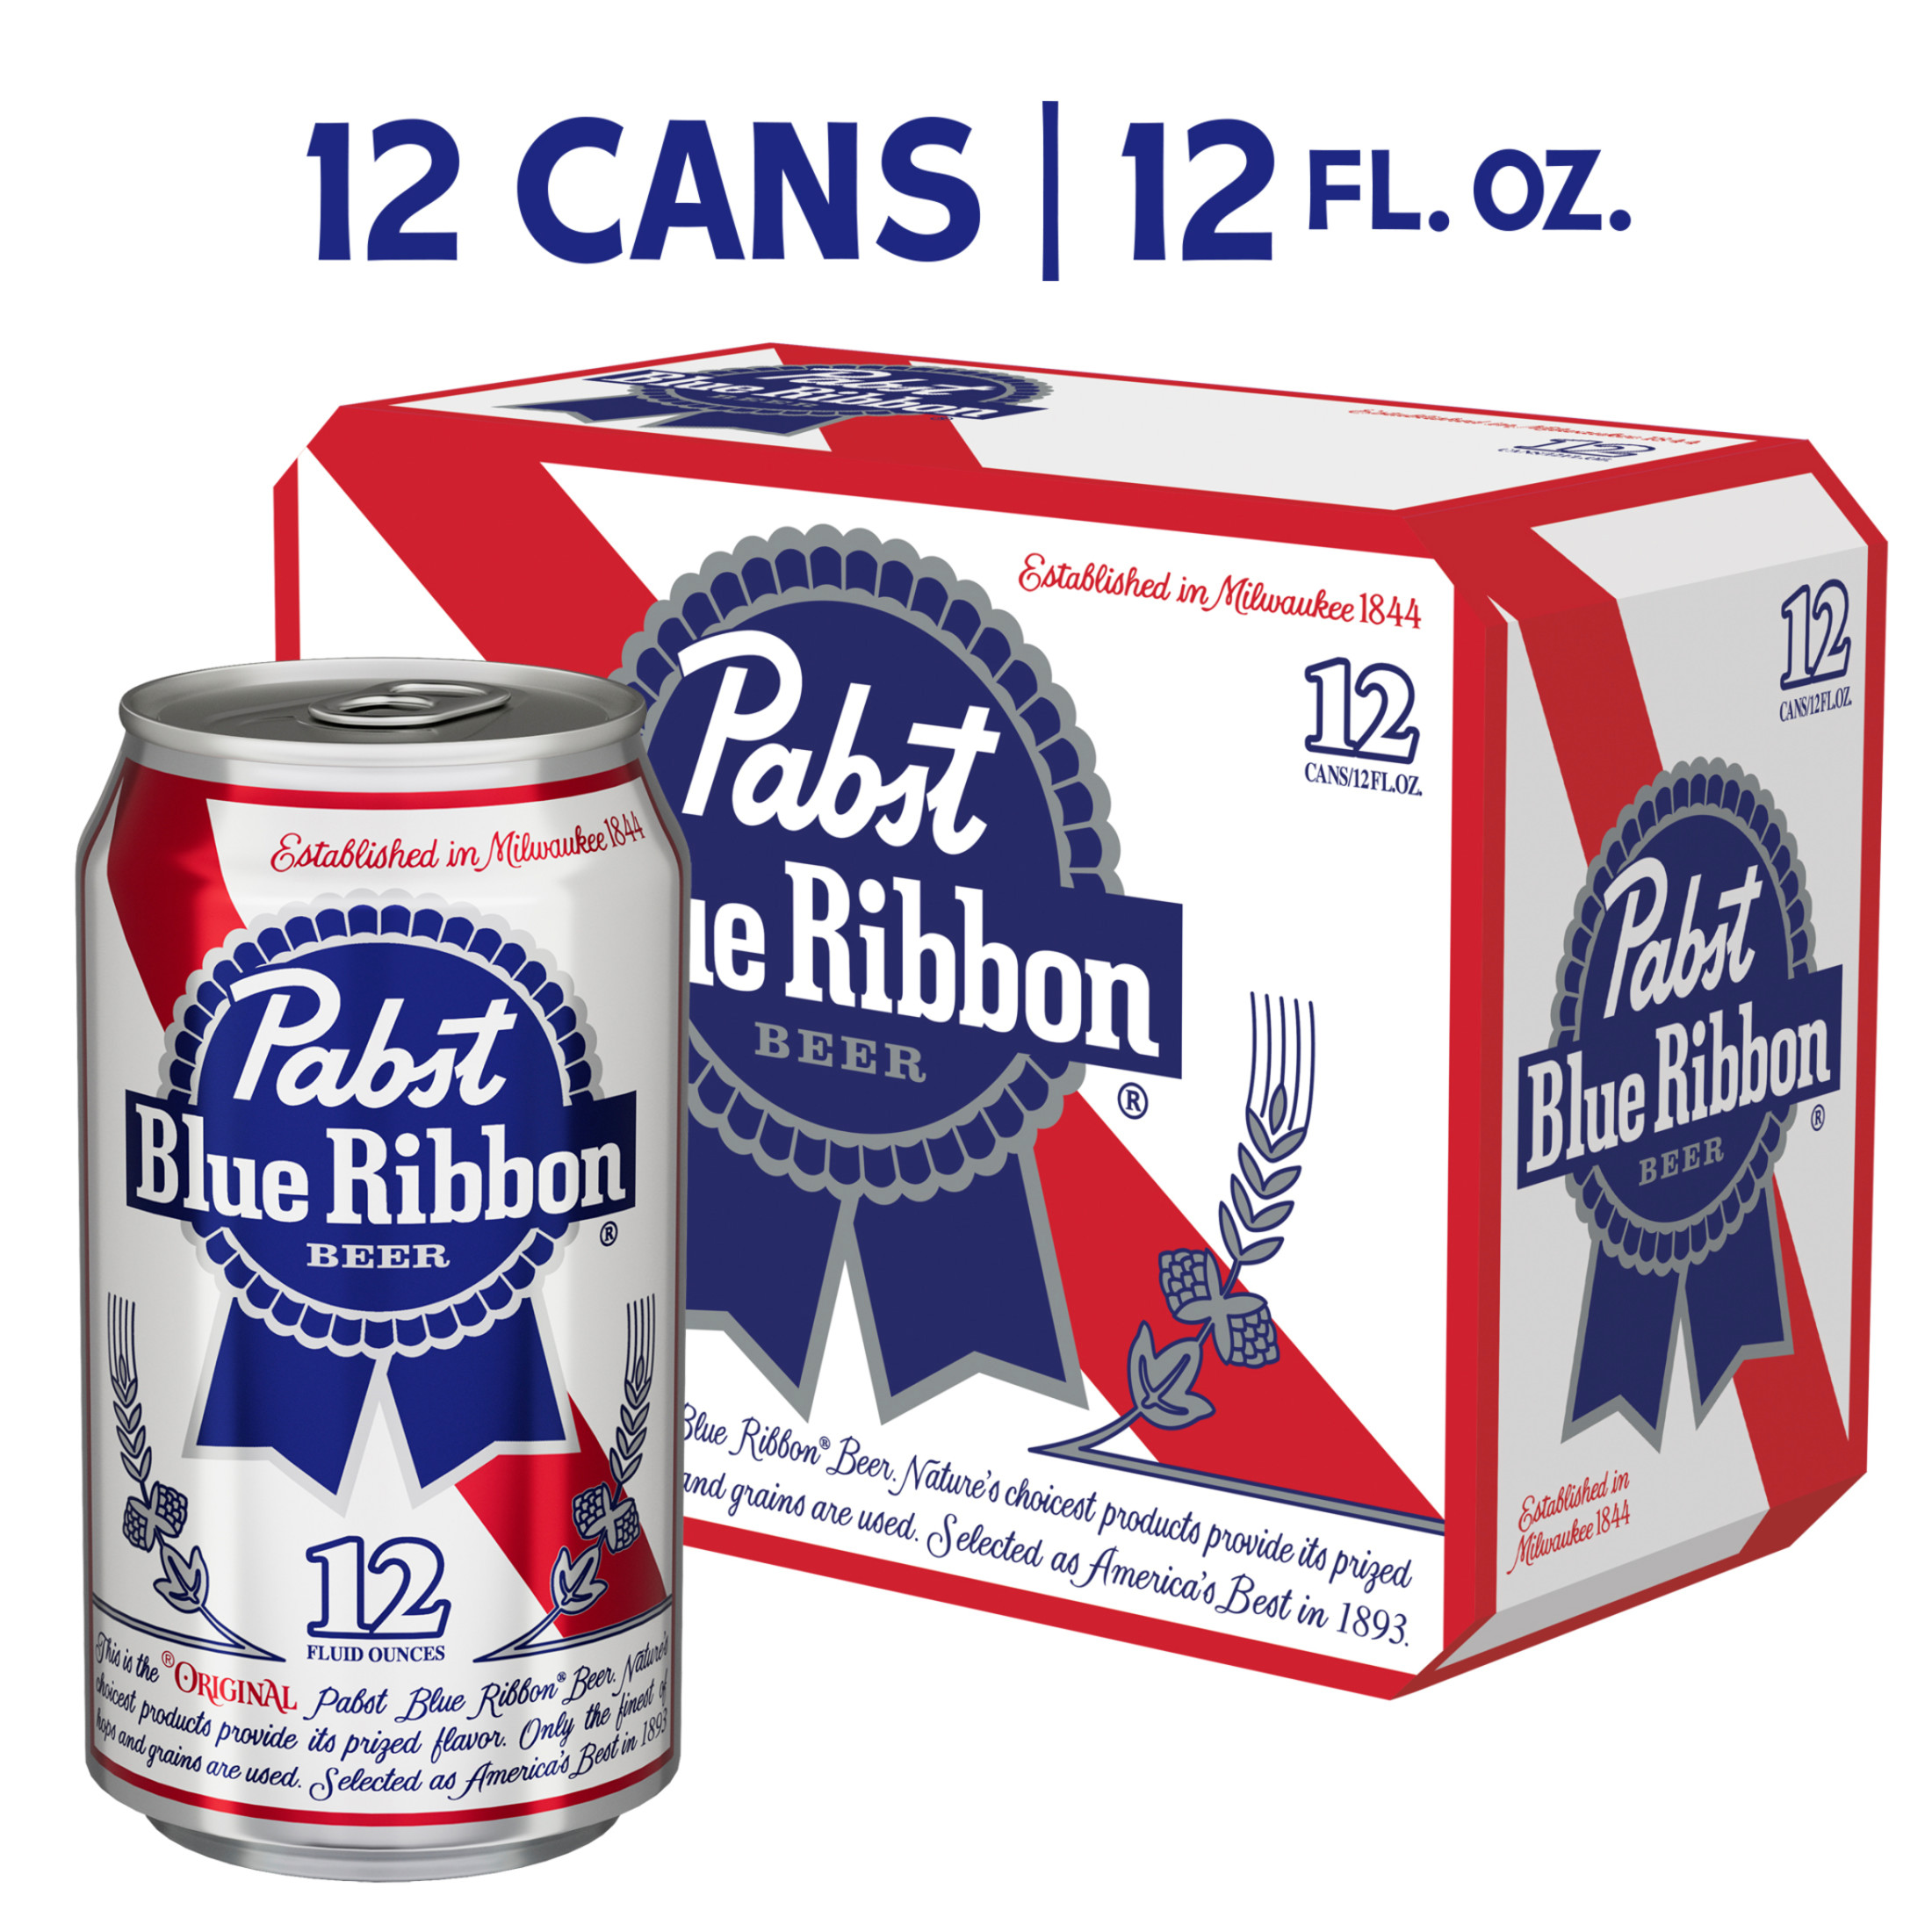 Pabst Blue Ribbon, Domestic Lager, 12 Pack, 12 fl oz Can, 3.9% ABV - image 1 of 12